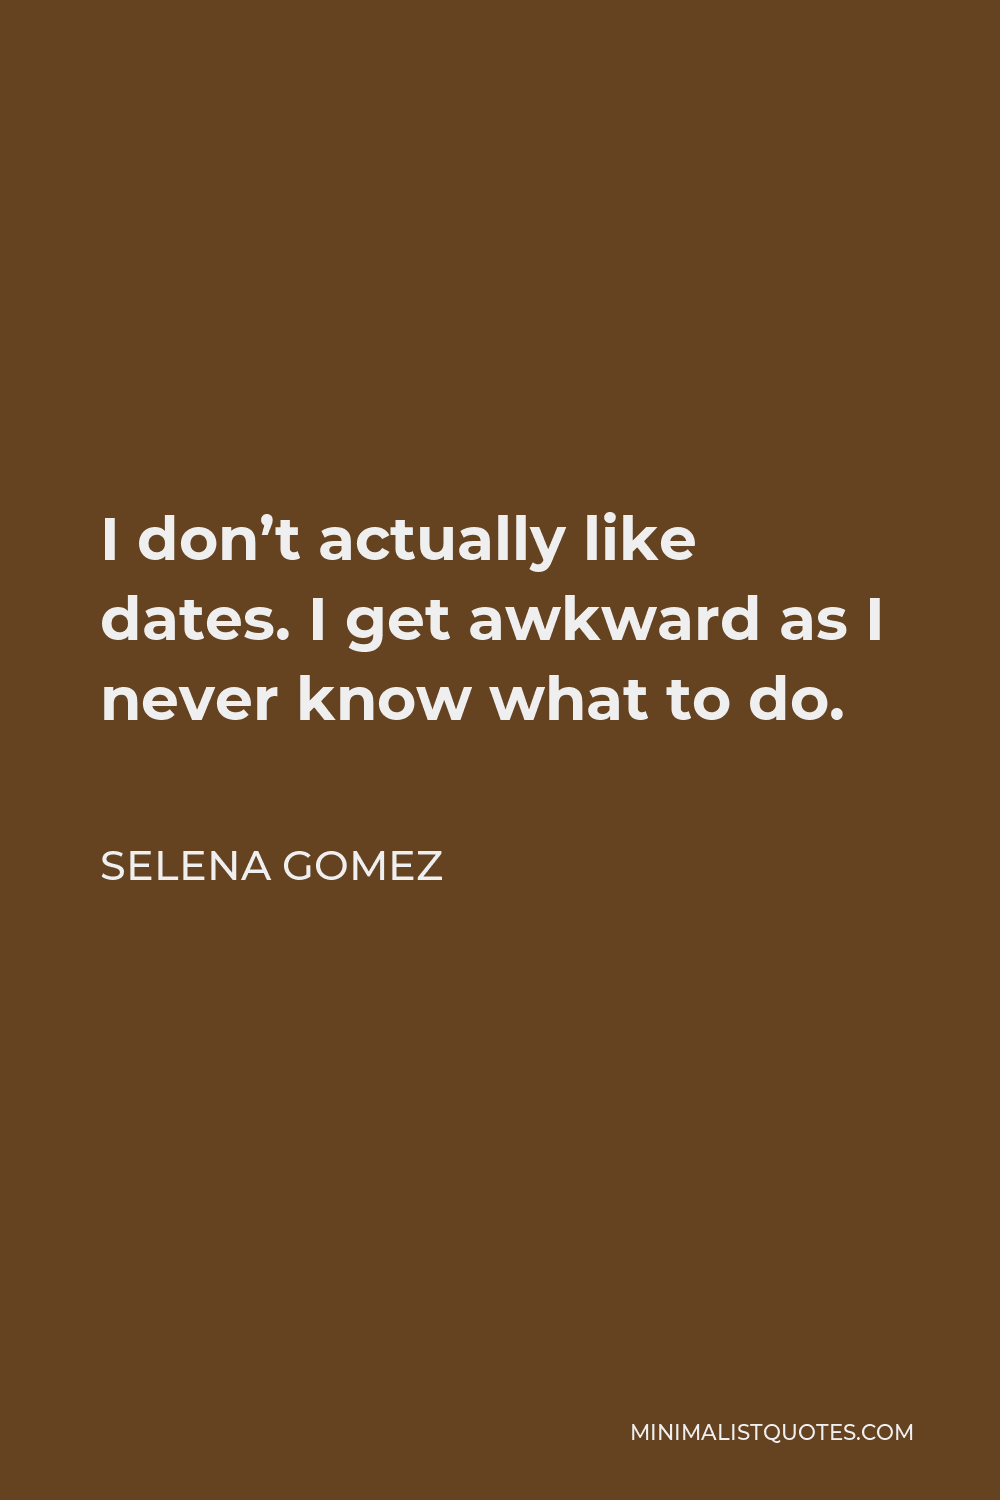 Selena Gomez Quote - I don’t actually like dates. I get awkward as I never know what to do.